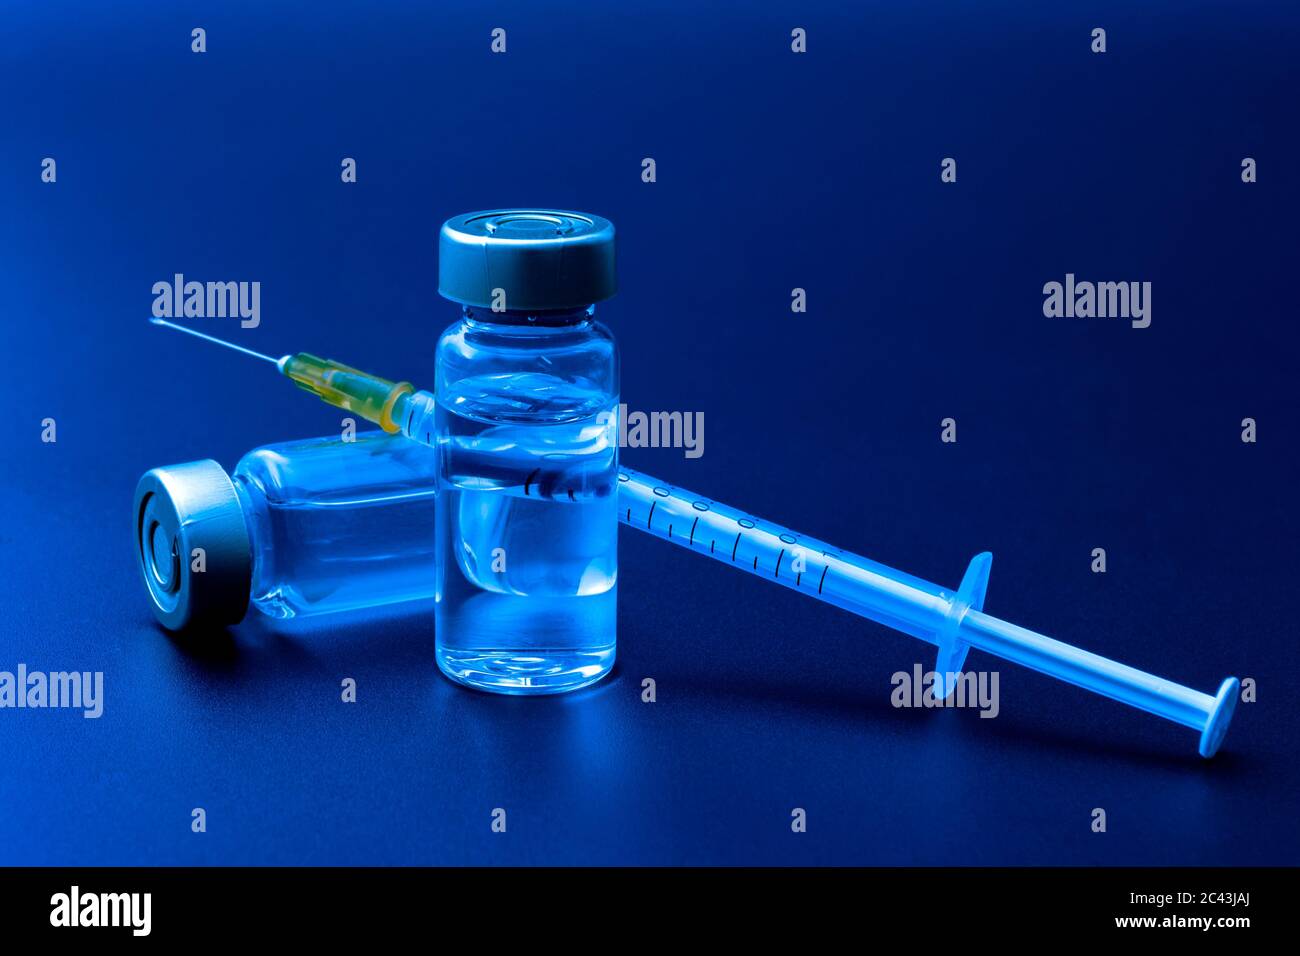 Vaccines, botulinum toxin and insulin ampules concept theme with glass vials with clear liquid next to a syringe and a hypodermic needle isolated on b Stock Photo